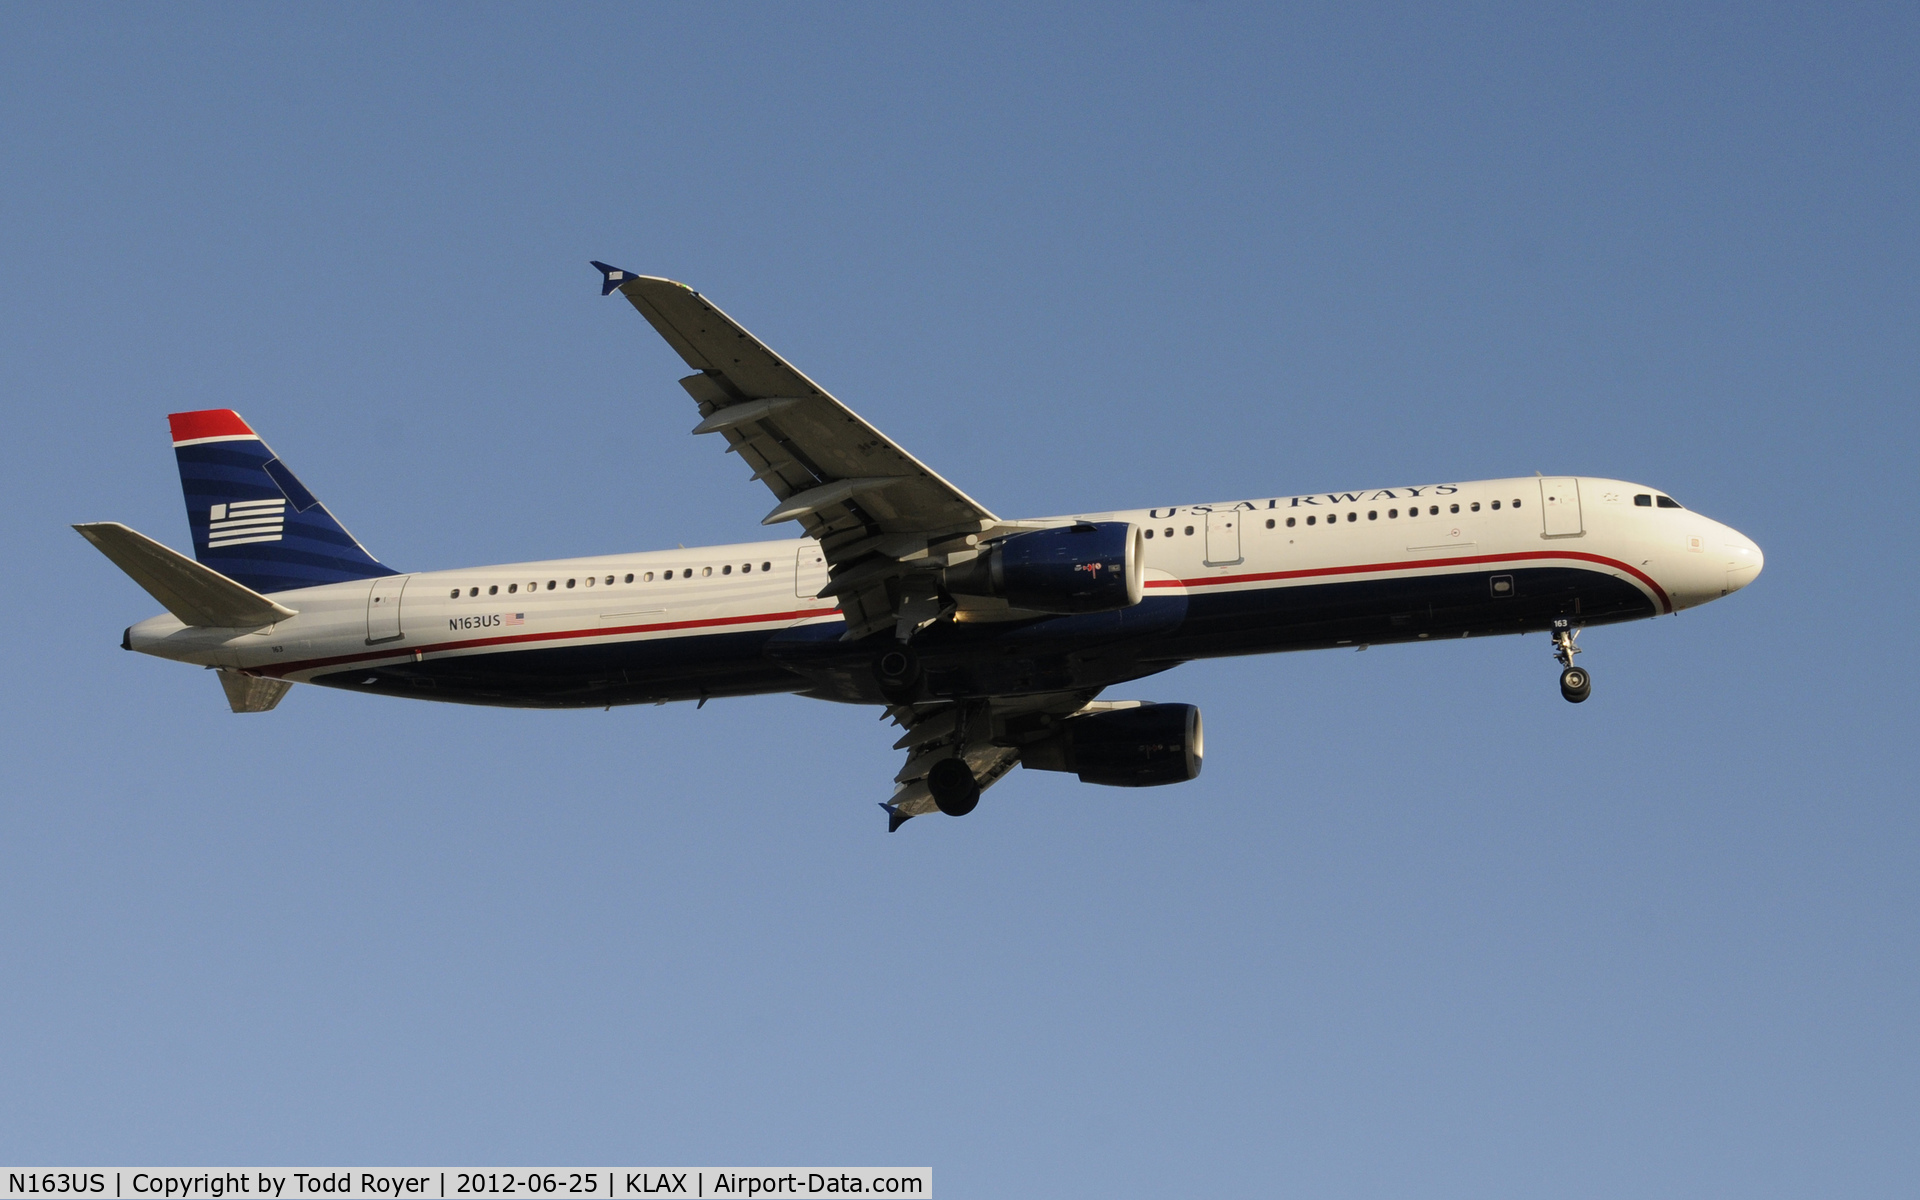 N163US, 2001 Airbus A321-211 C/N 1417, Arriving at LAX on 24R